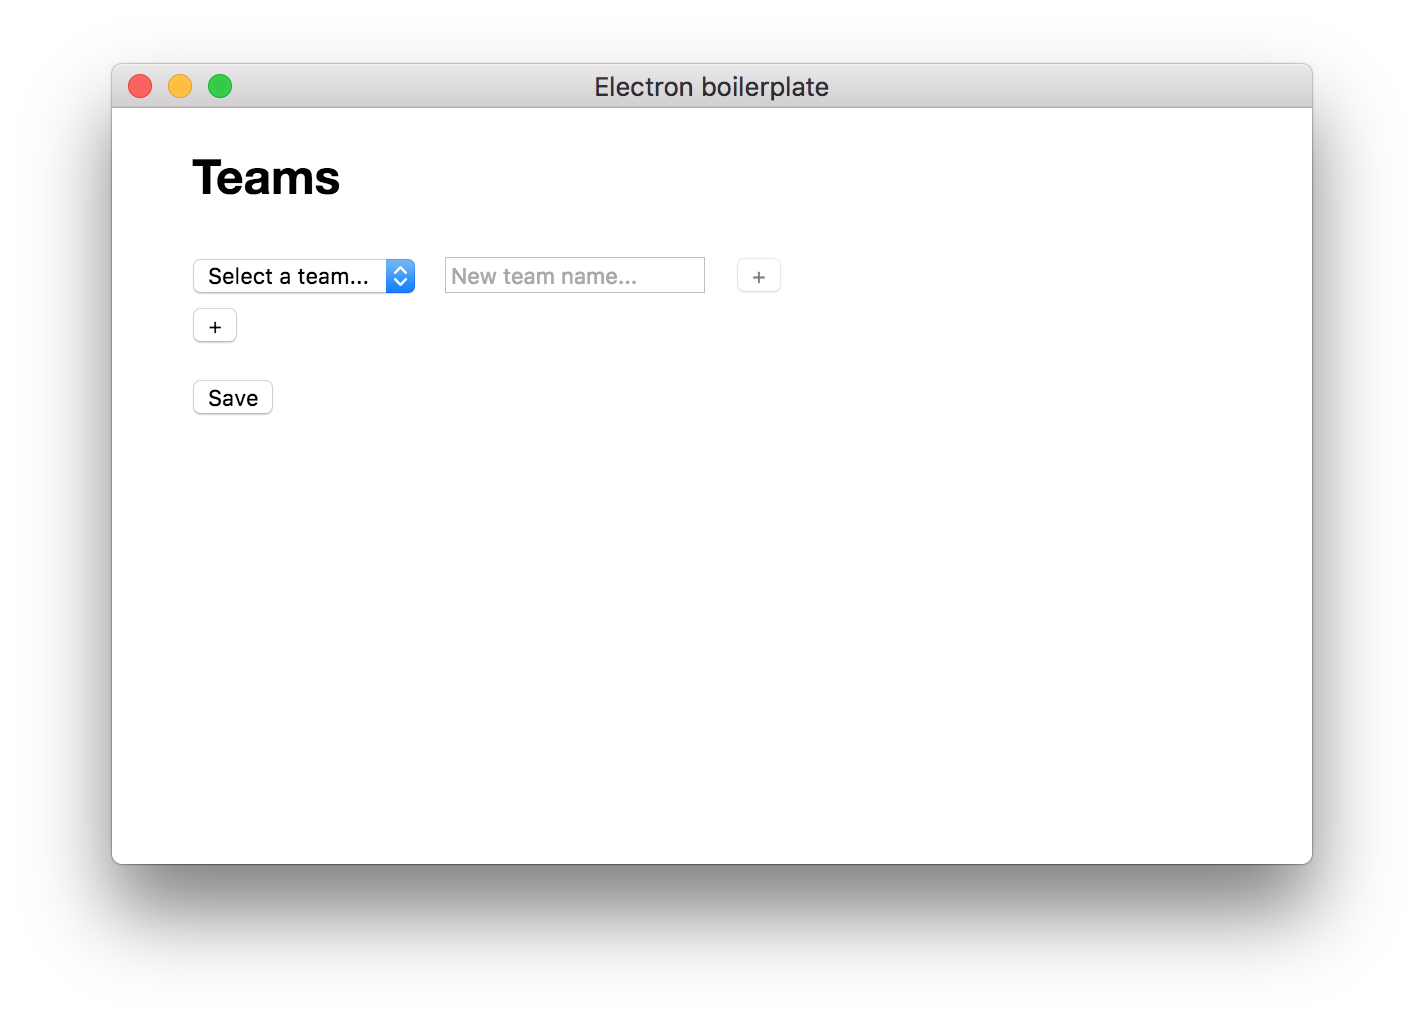 The team management screen, with options to select or add a team